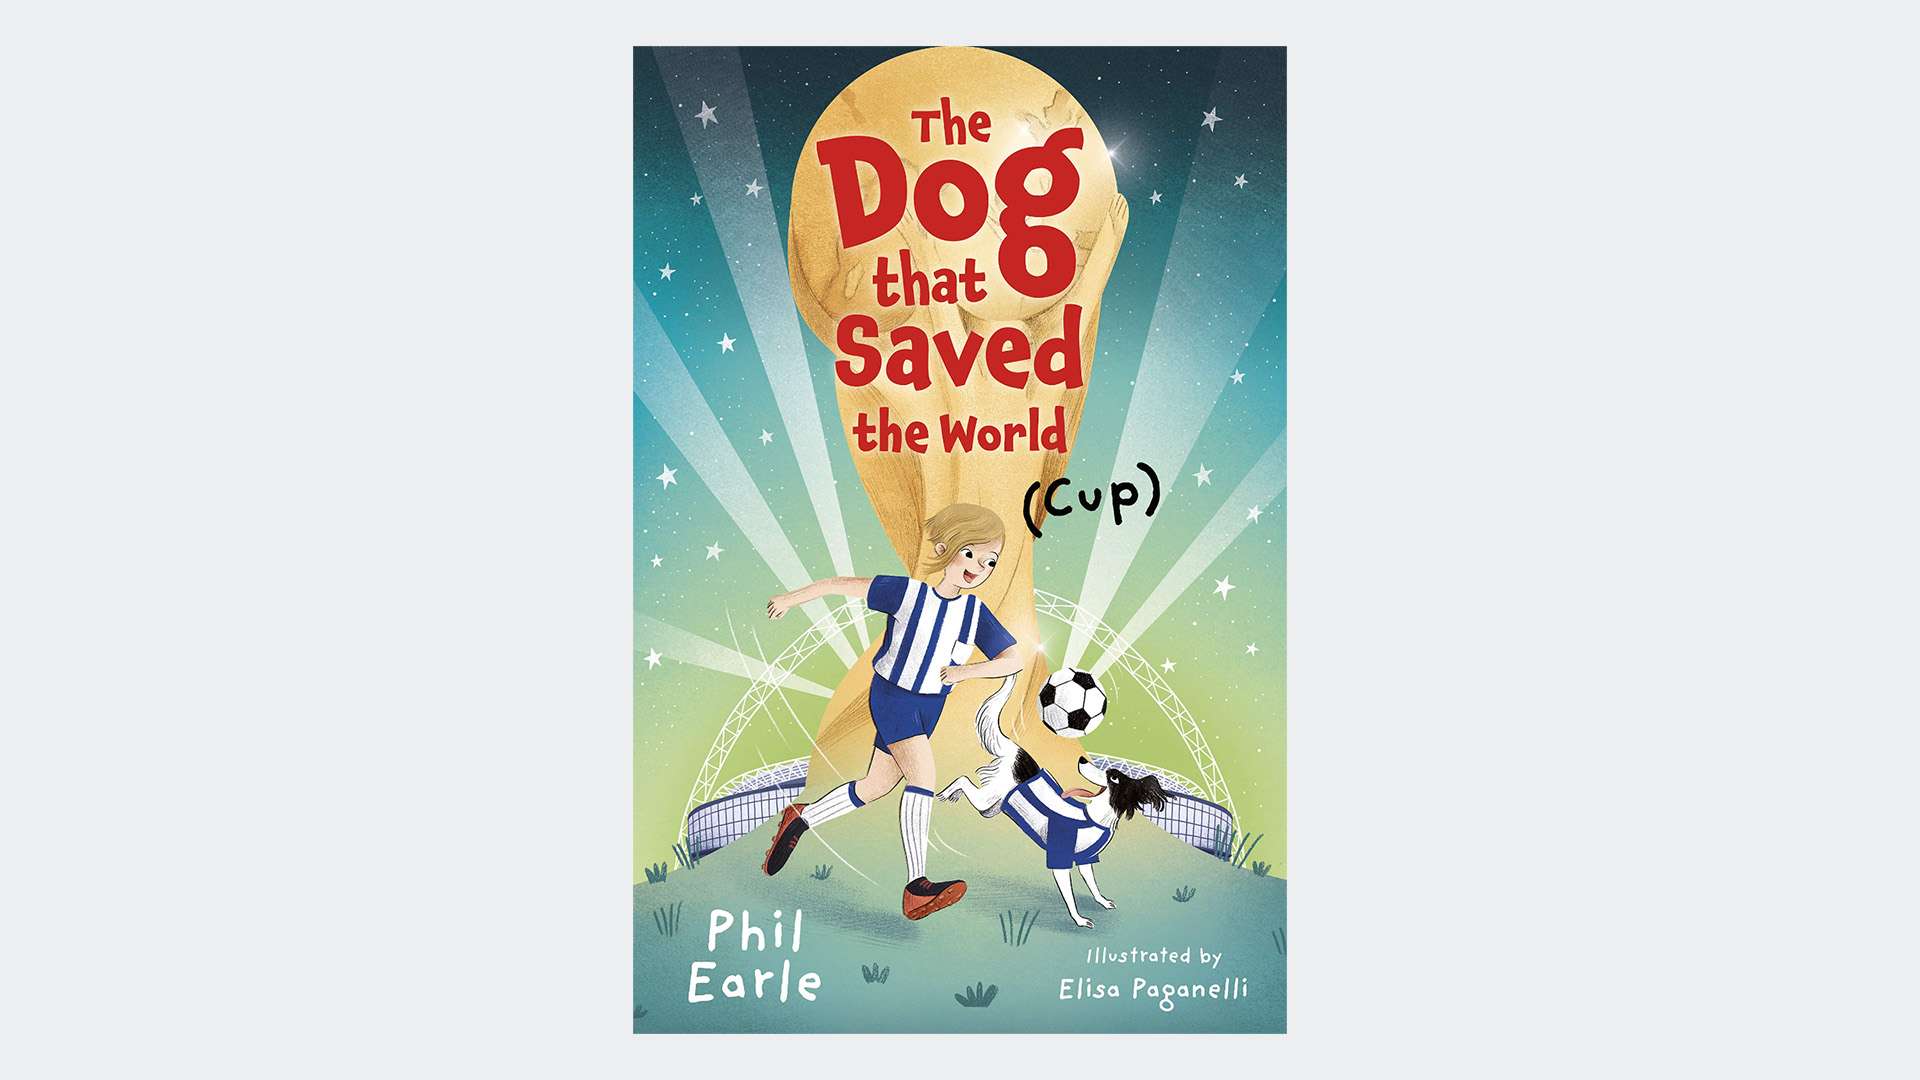 The Dog That Saved the World (Cup) 